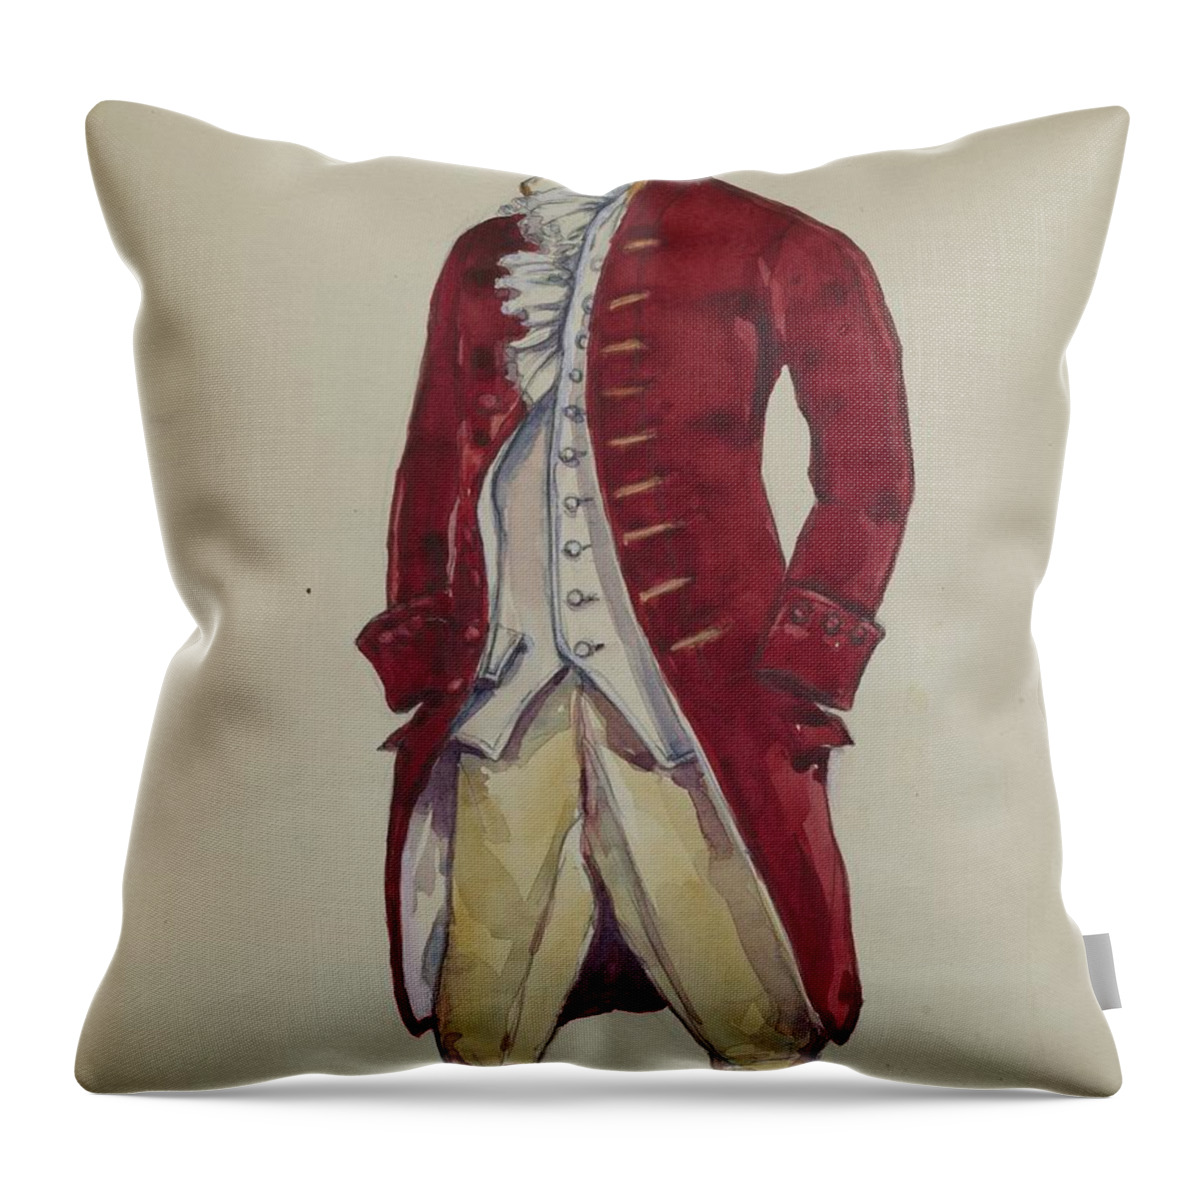  Throw Pillow featuring the drawing Suit by Nancy Crimi